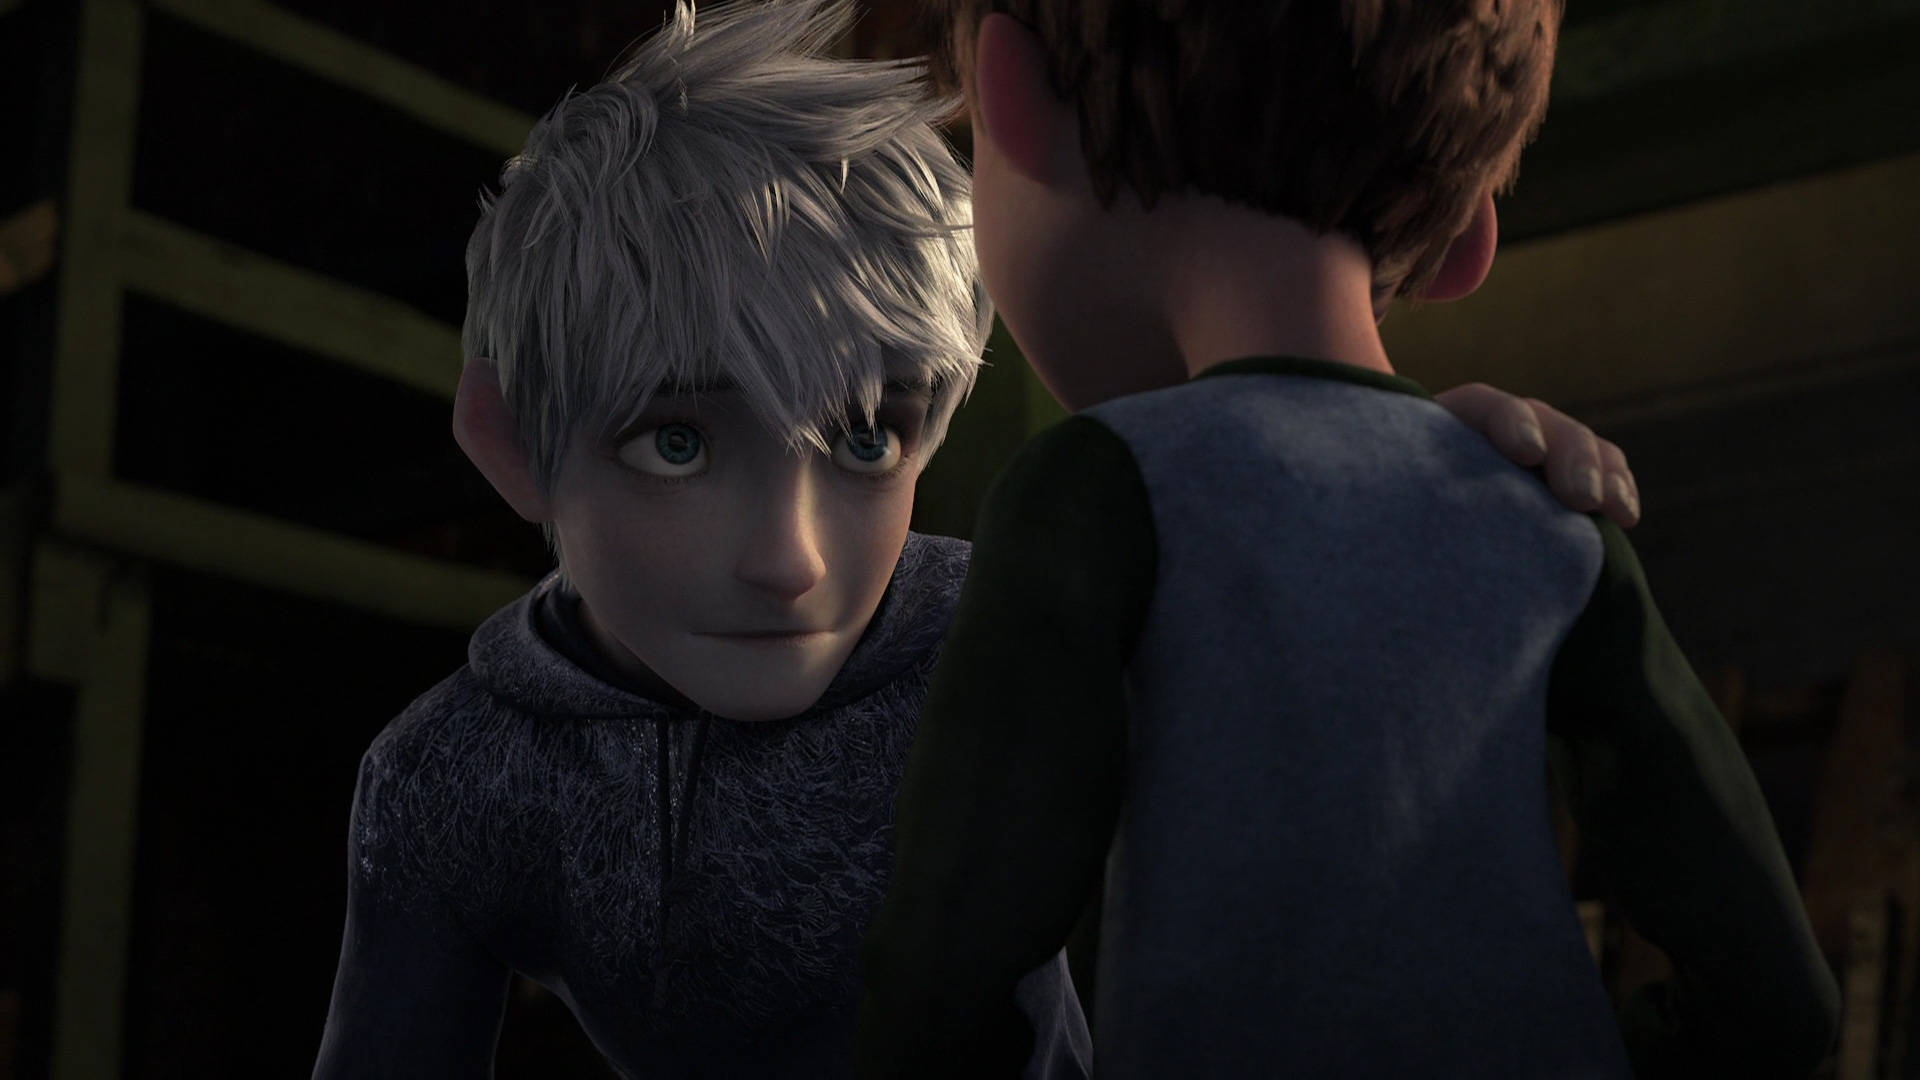 A Boy Is Hugging Another Boy In An Animated Movie Wallpaper